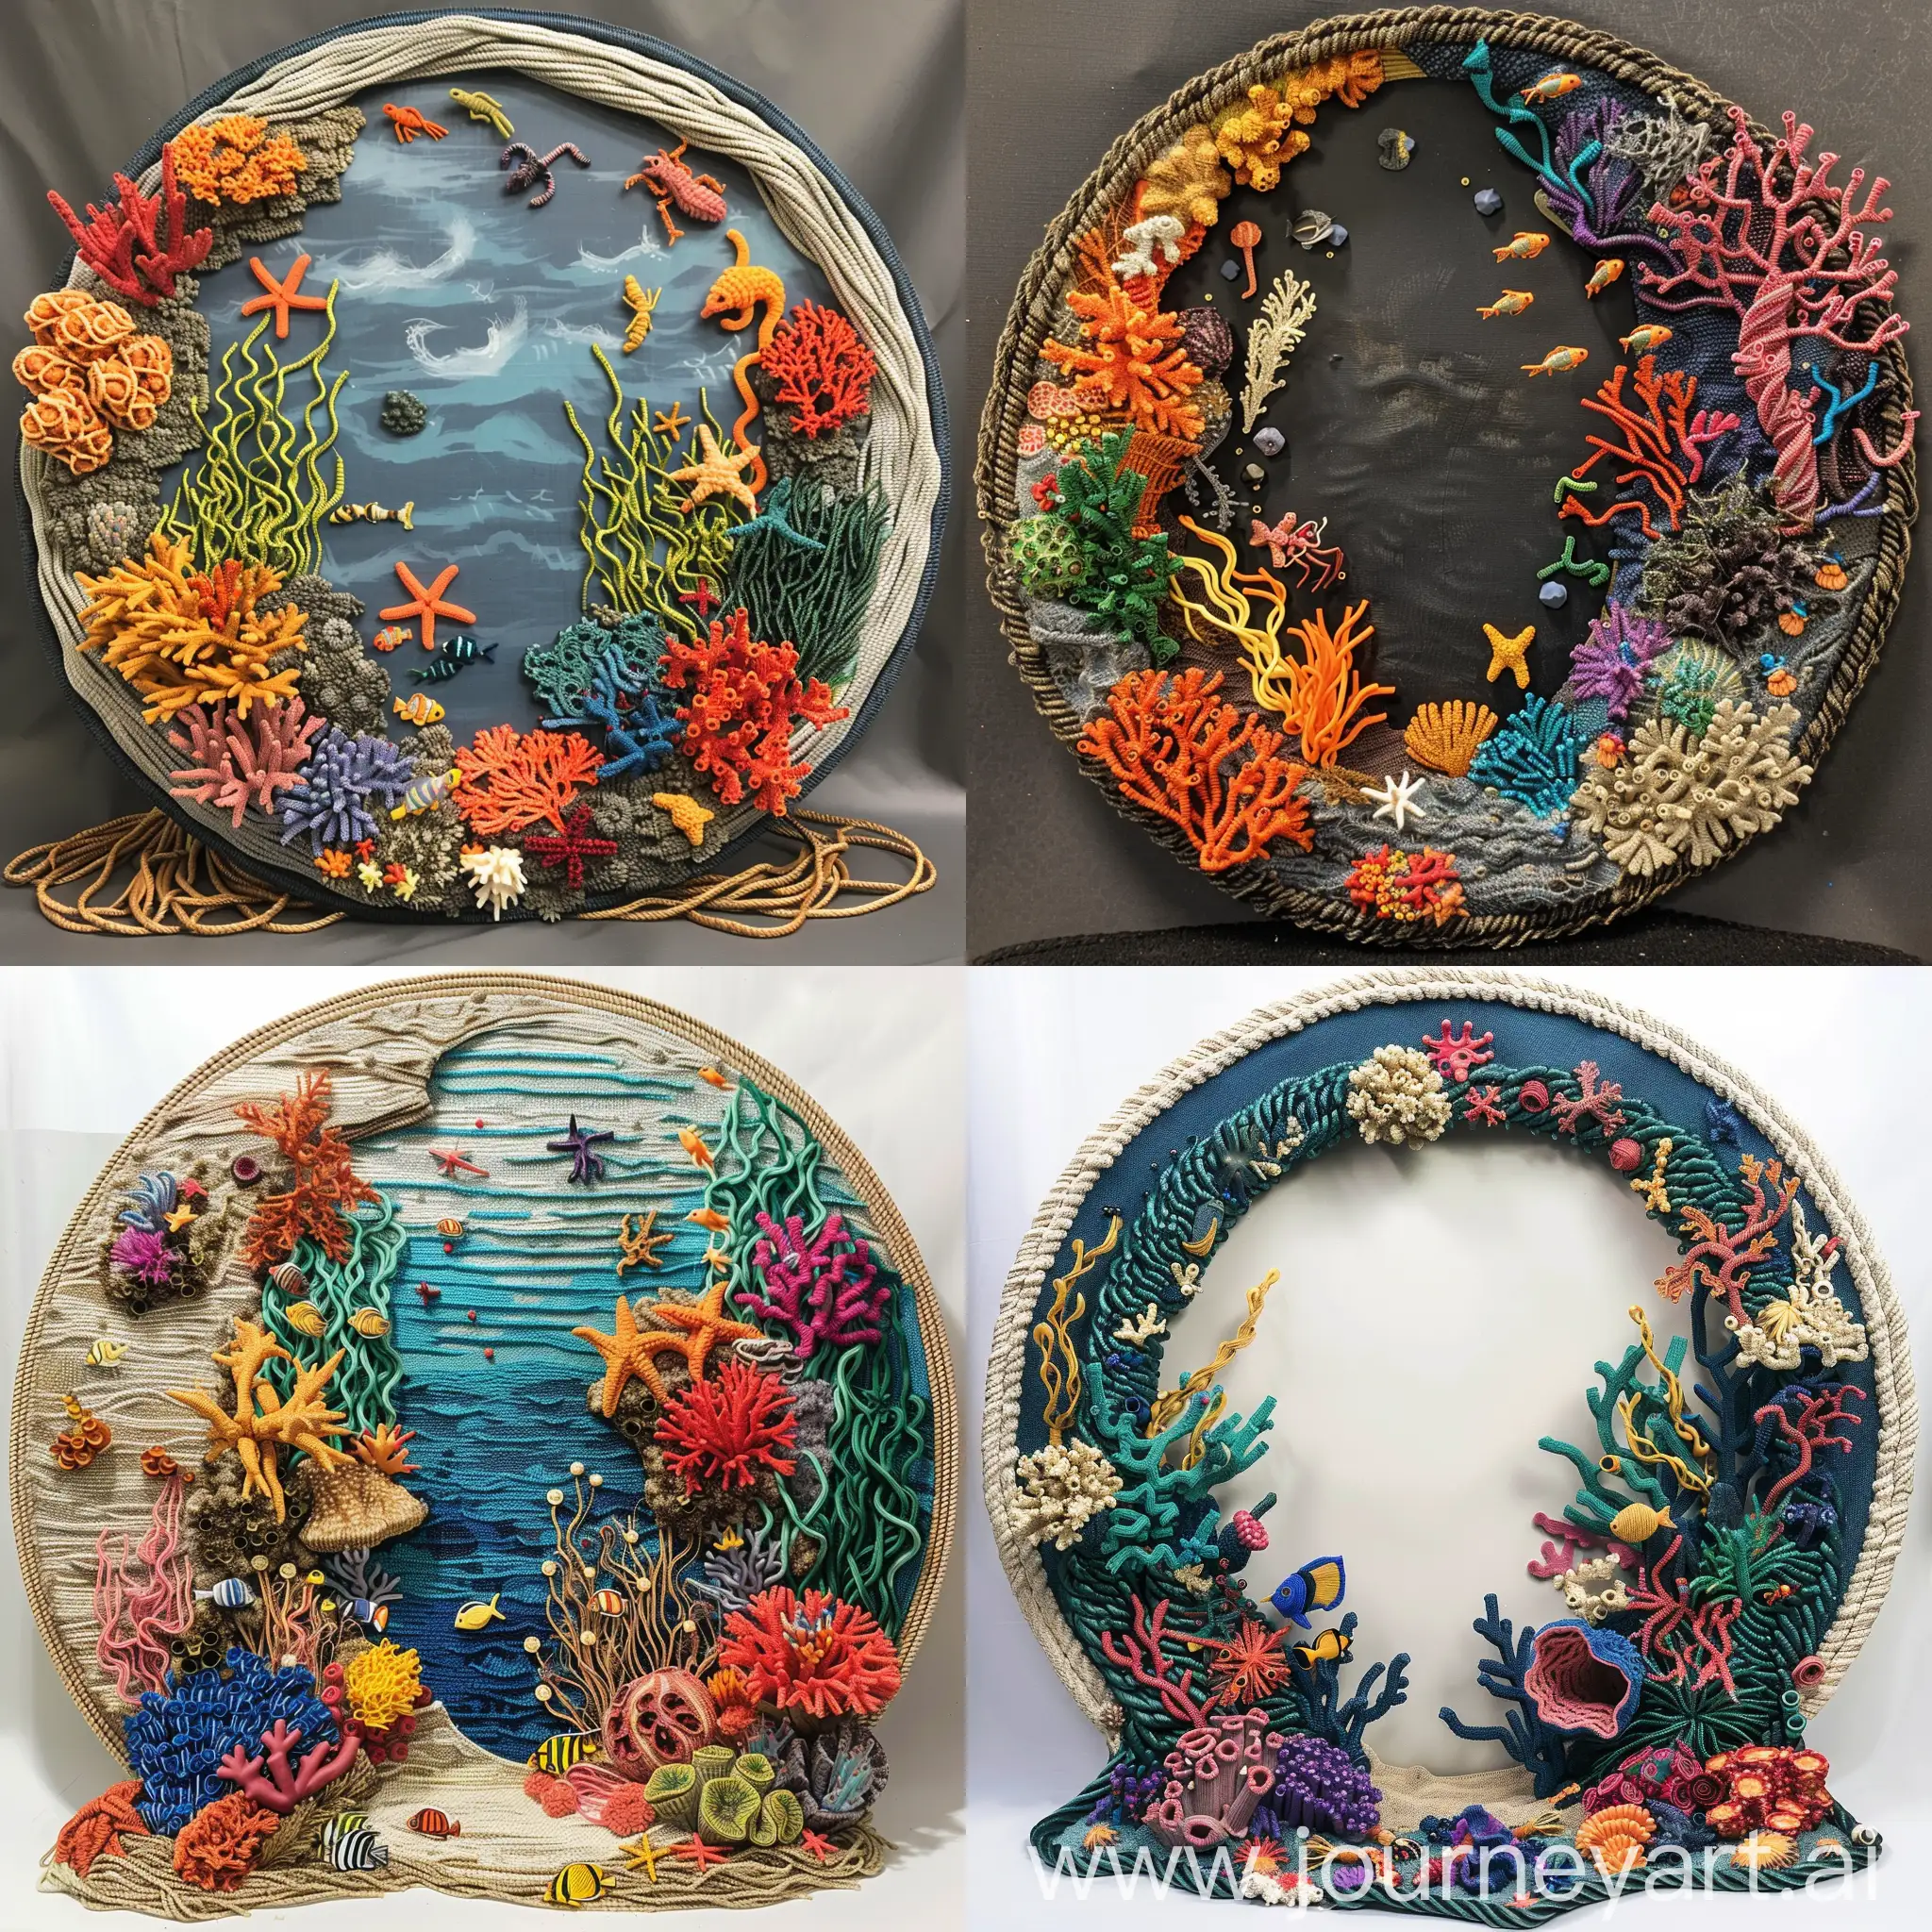 Circular-Coral-Reef-Art-Piece-with-Rope-Sea-Creatures